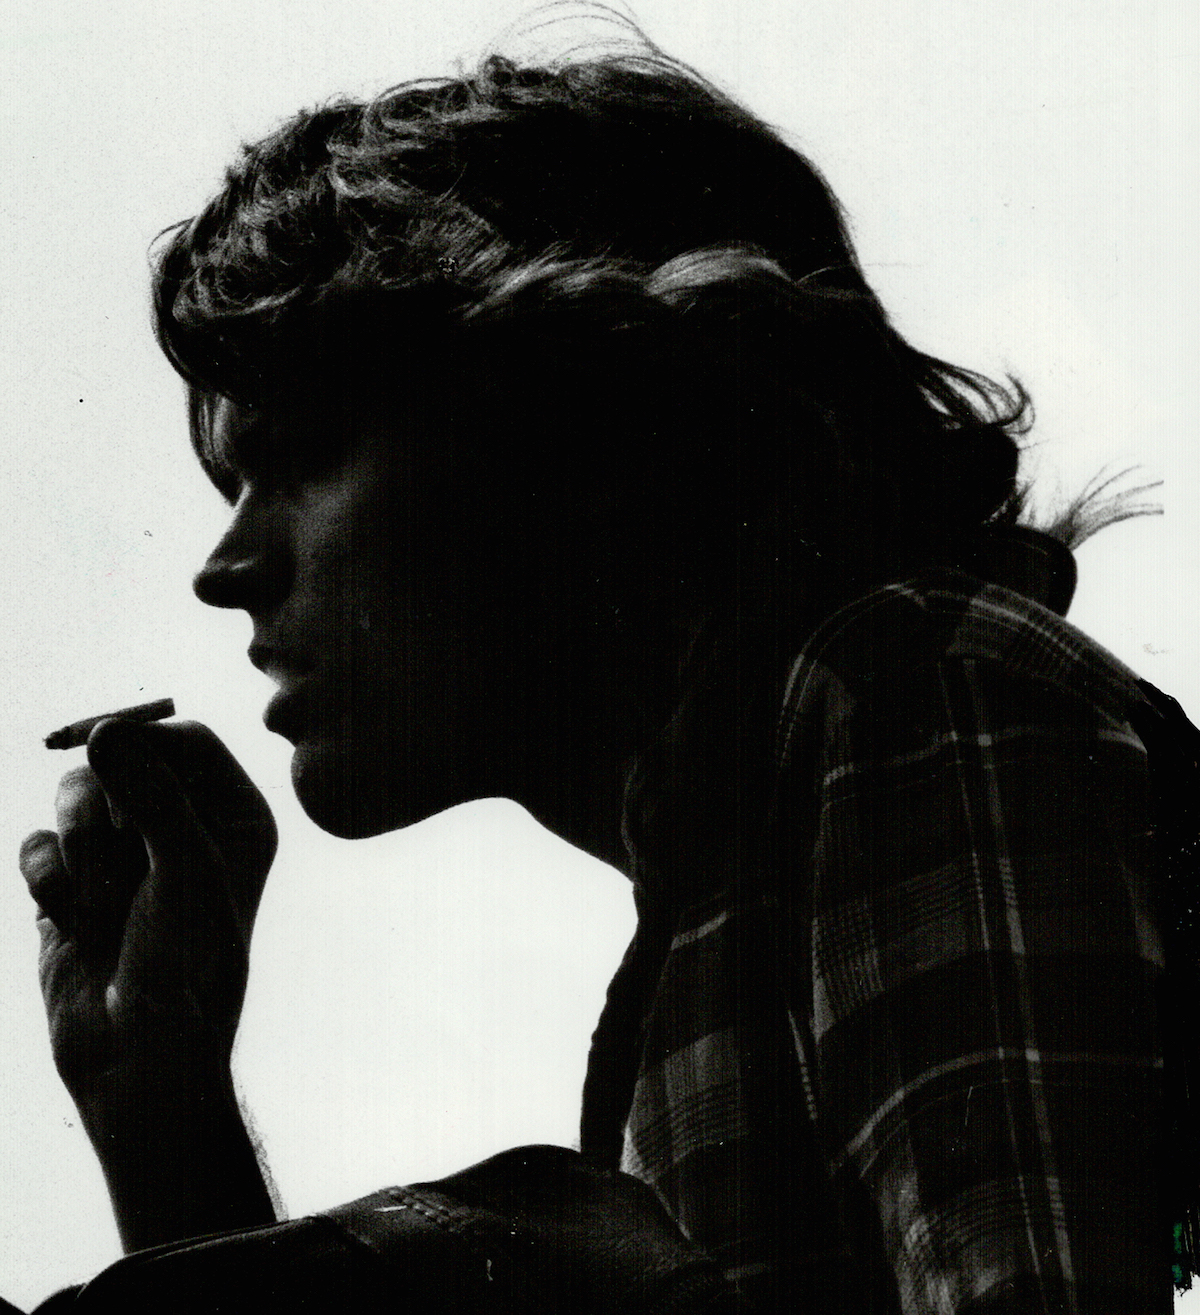 A person smoking marijuana in 1988 (Slaughter—Toronto Public Library/Getty images)